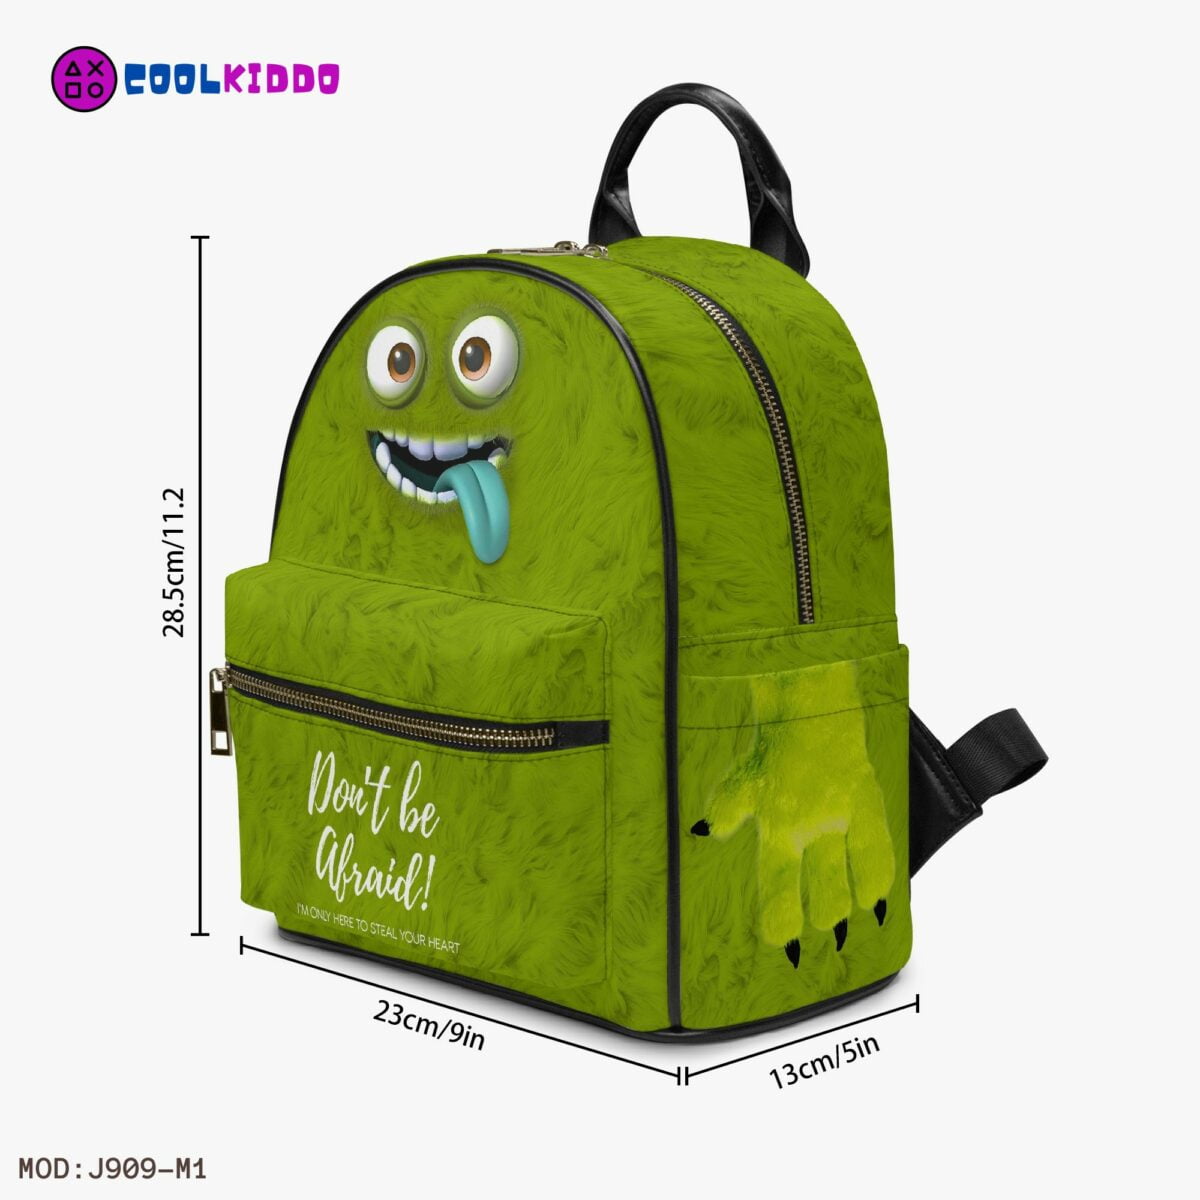 Green Monster Face Little Backpack – Flurry Simulation Fun All-Over Print Leather Street Bag For Girls Cool Kiddo 22